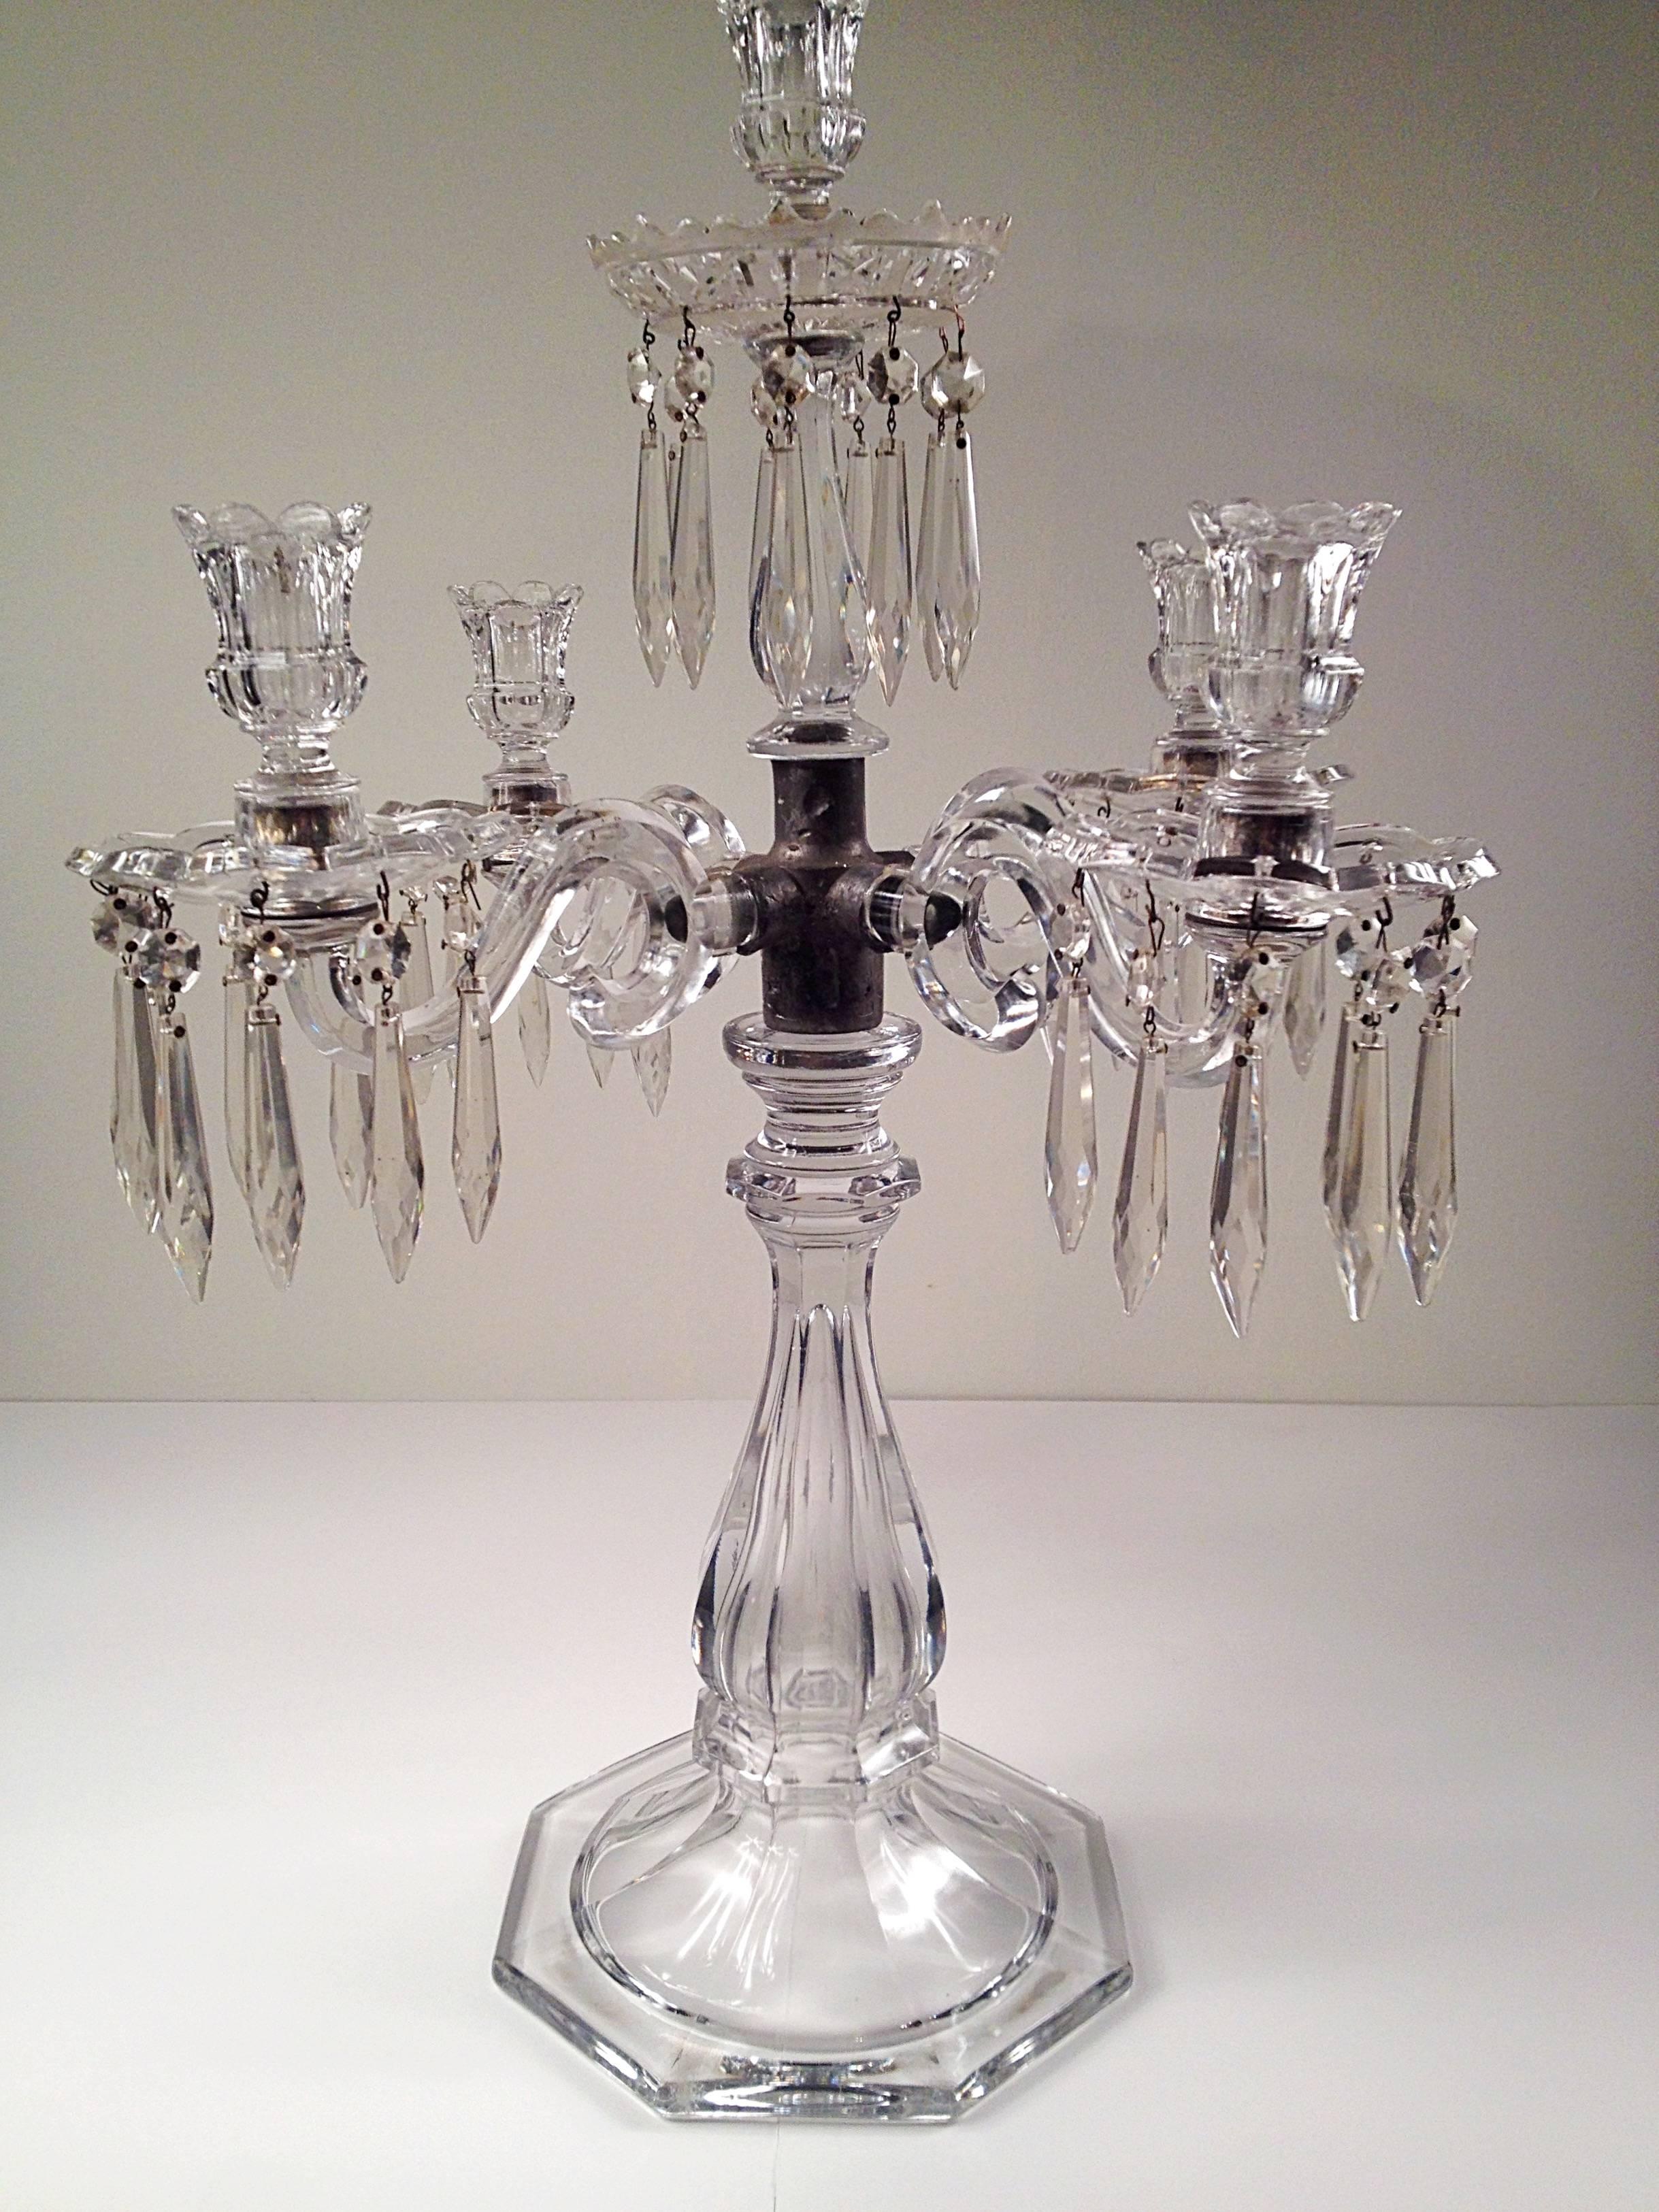 Five-Light French Crystal Candelabra In Excellent Condition For Sale In By Appointment Only, Ontario